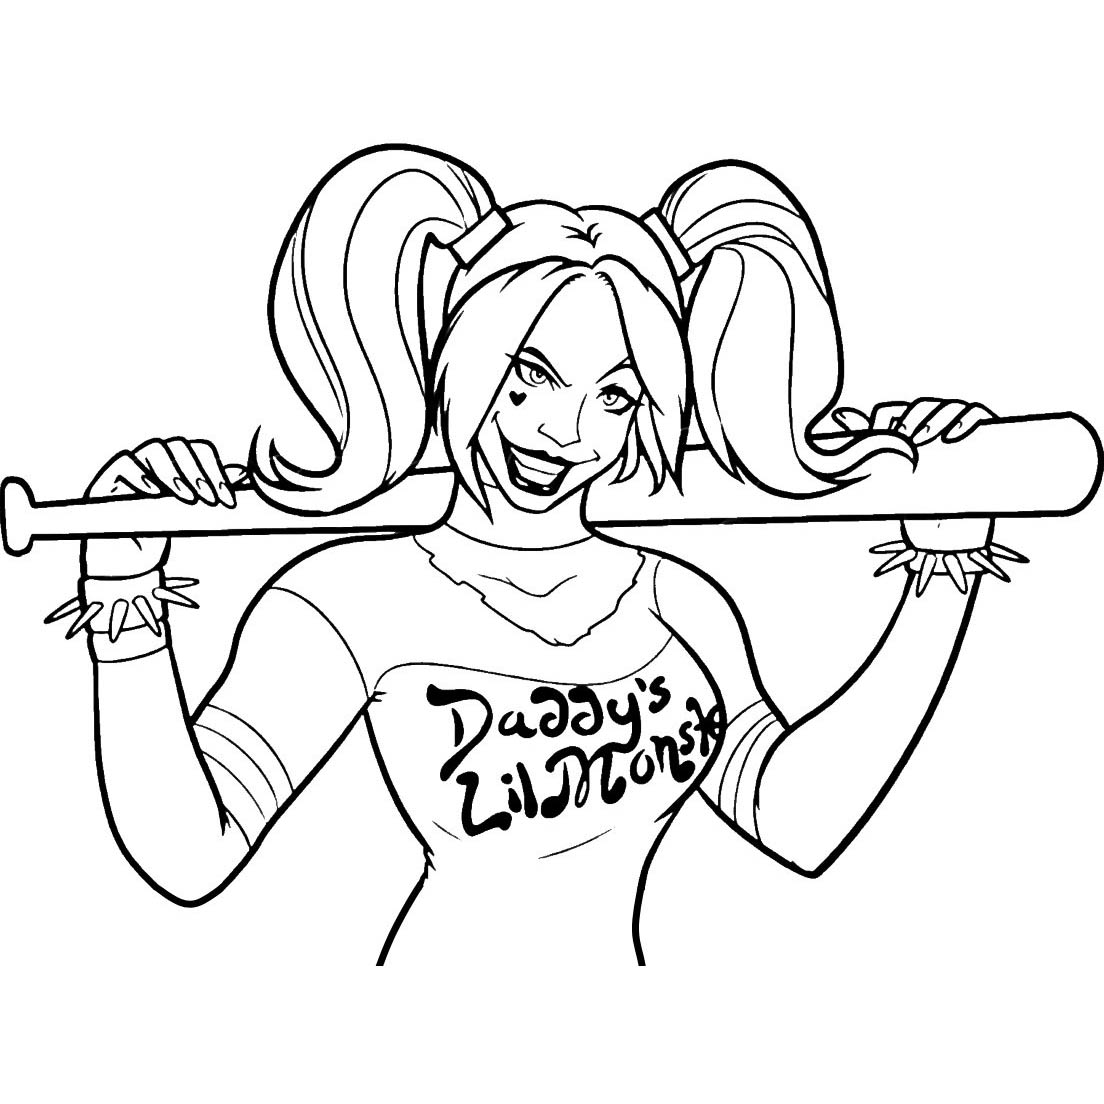 Suicide Squad Coloring Pages Chibi Harley Quinn and Joker - XColorings.com